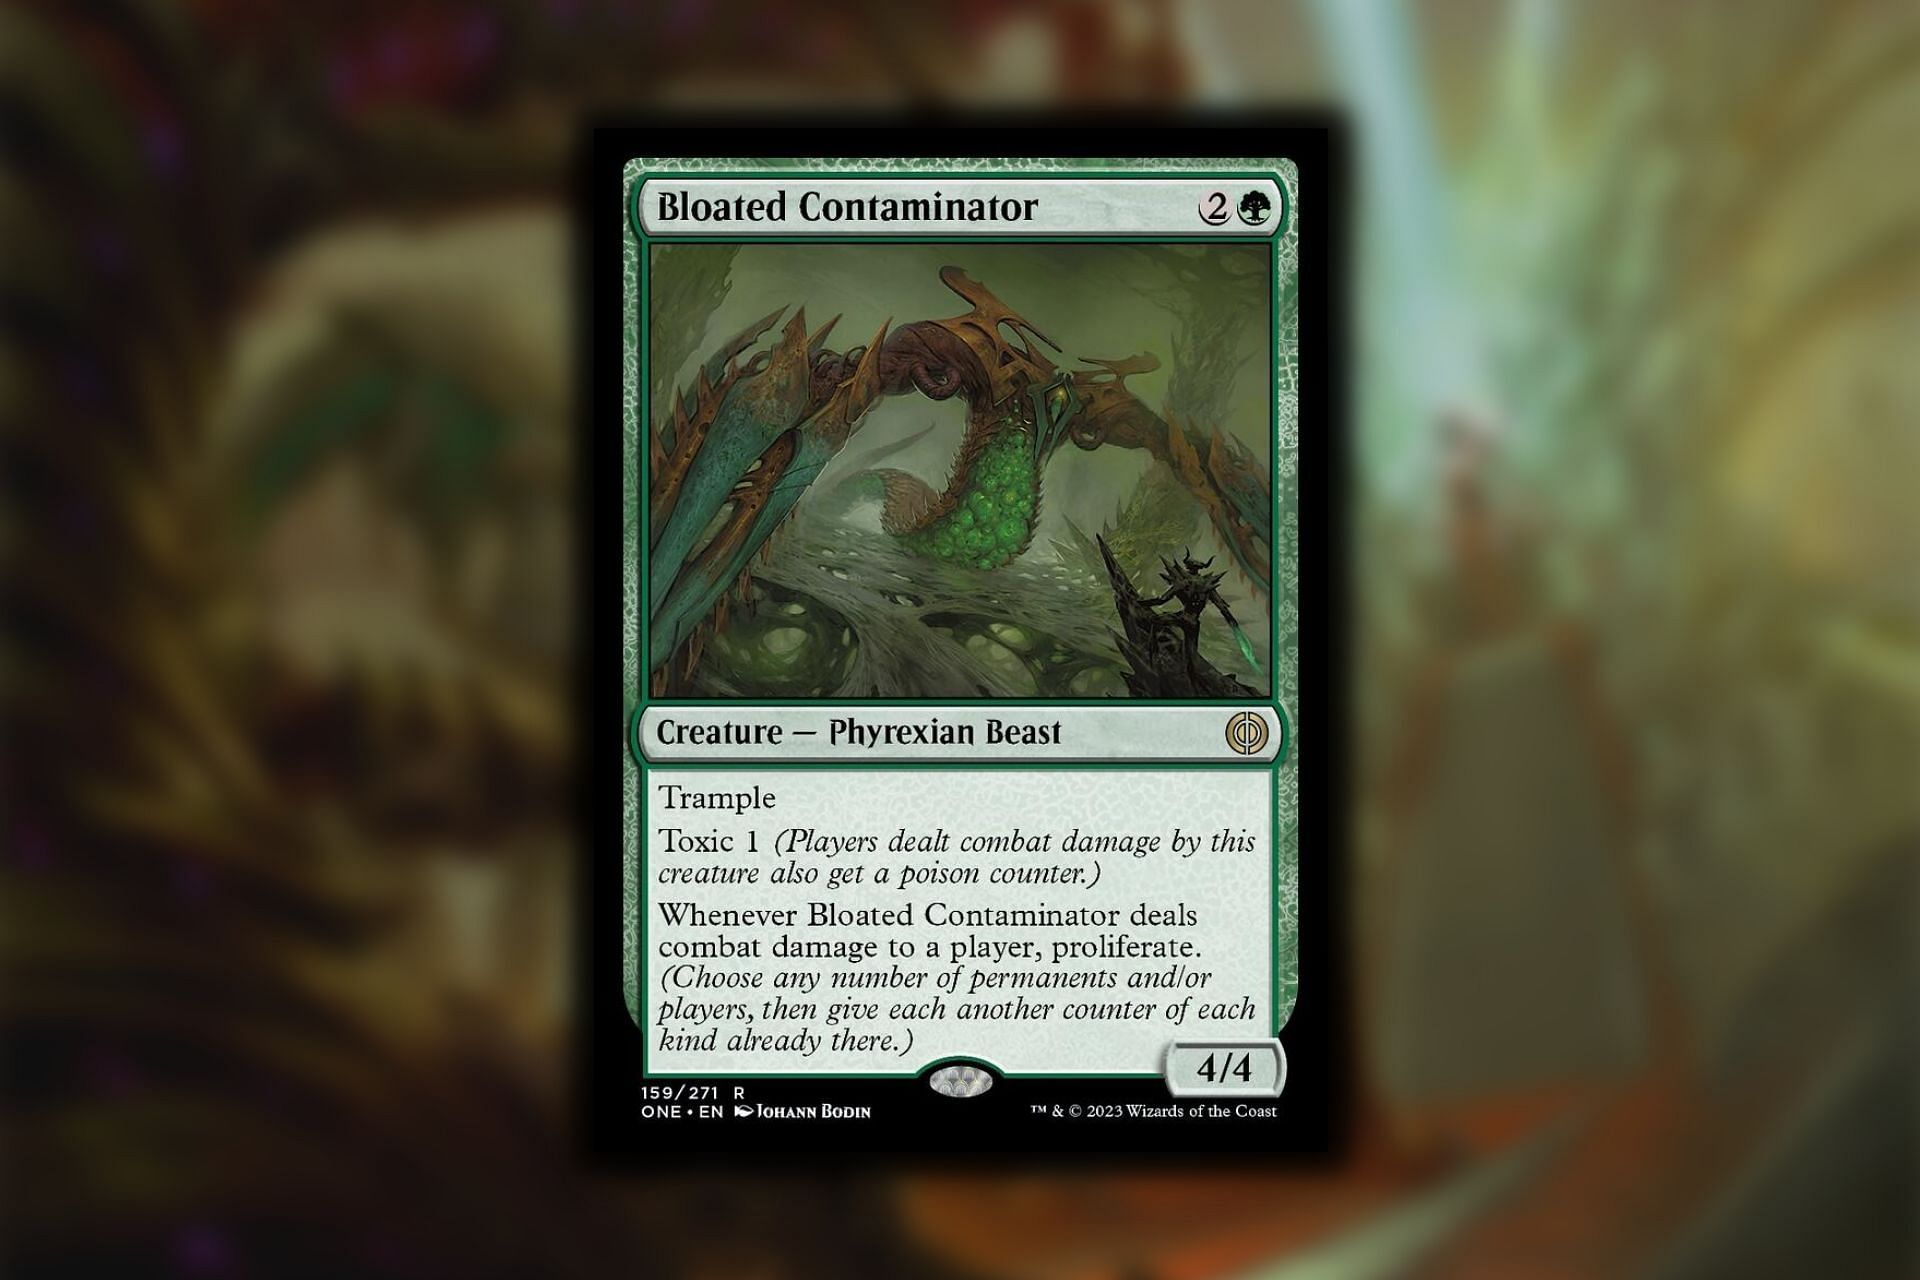 Bloated Contaminator in Magic: The Gathering (Image via Wizards of the Coast)